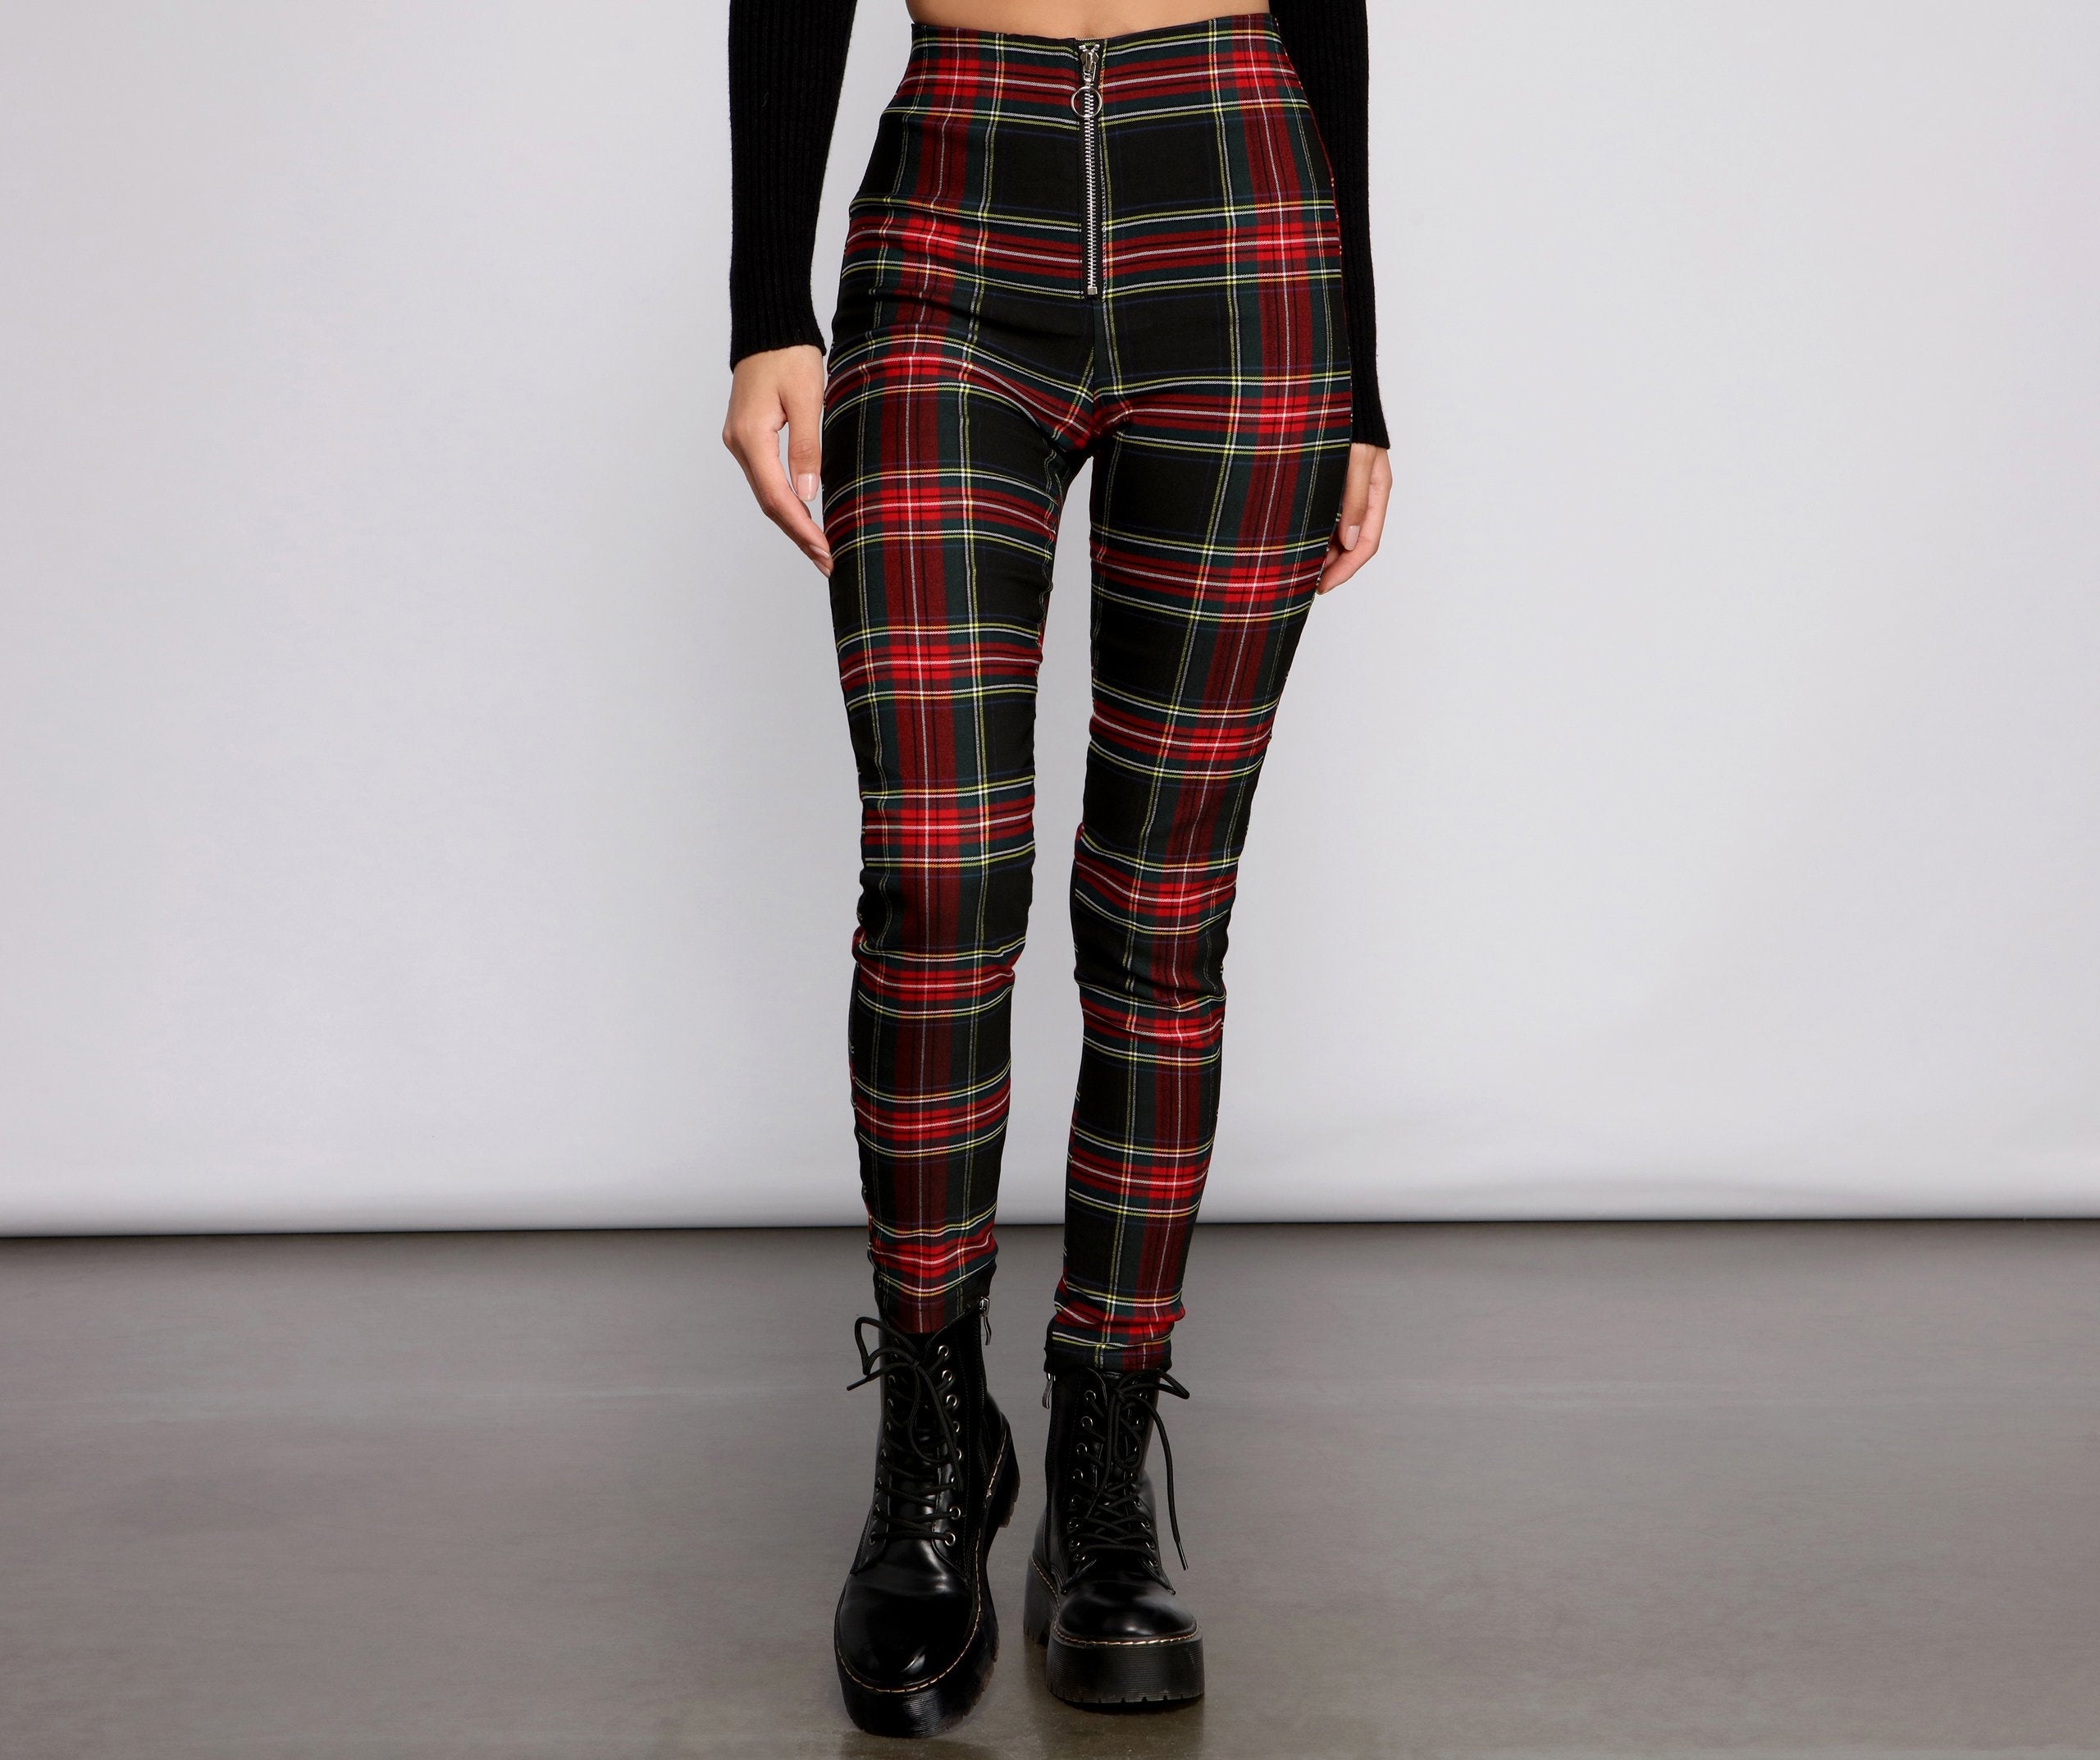 High Waist Plaid Zip Front Pants - Lady Occasions